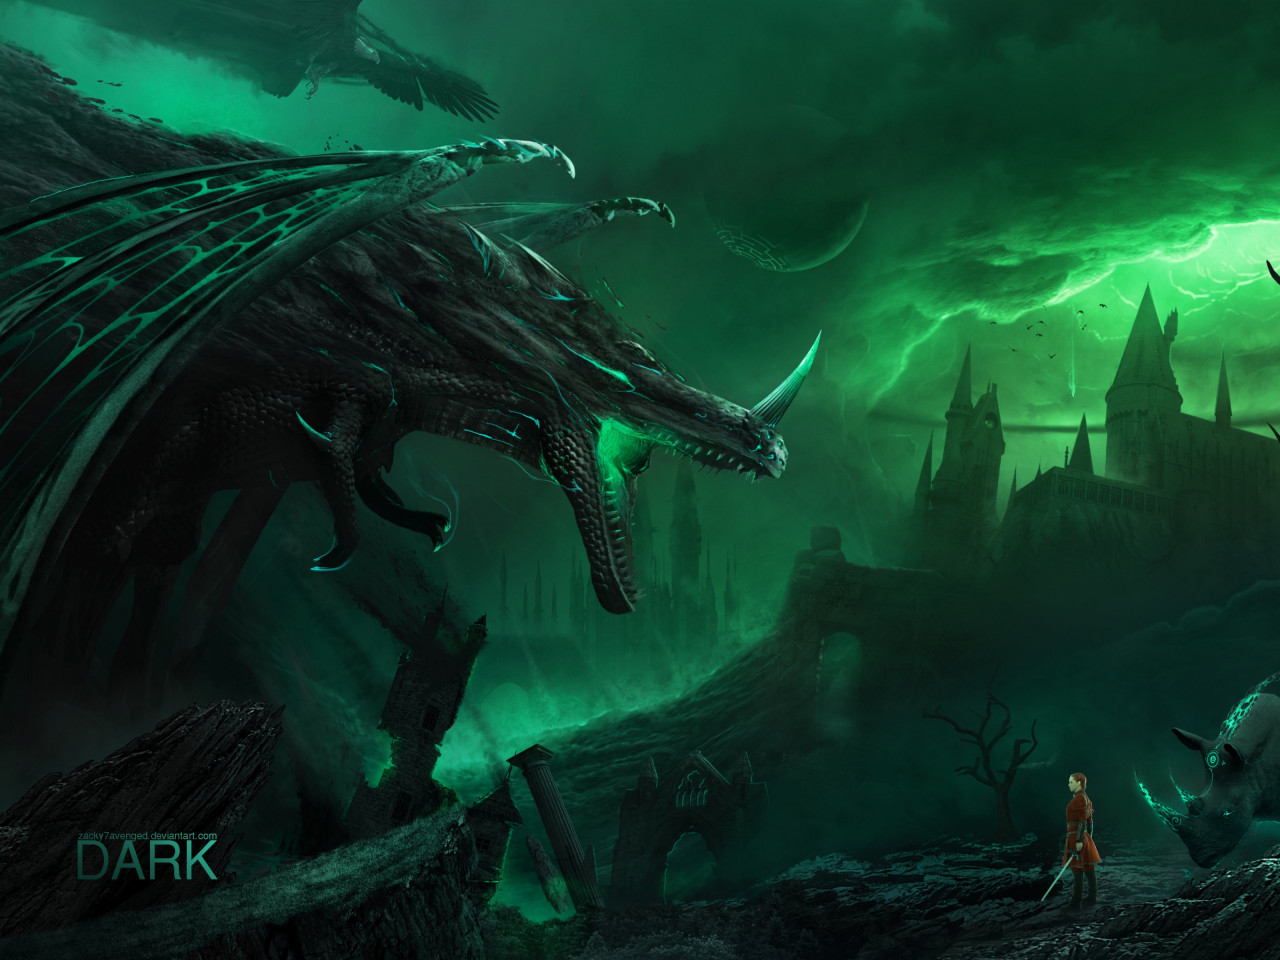 The dark creatures are coming wallpaper 1280x960